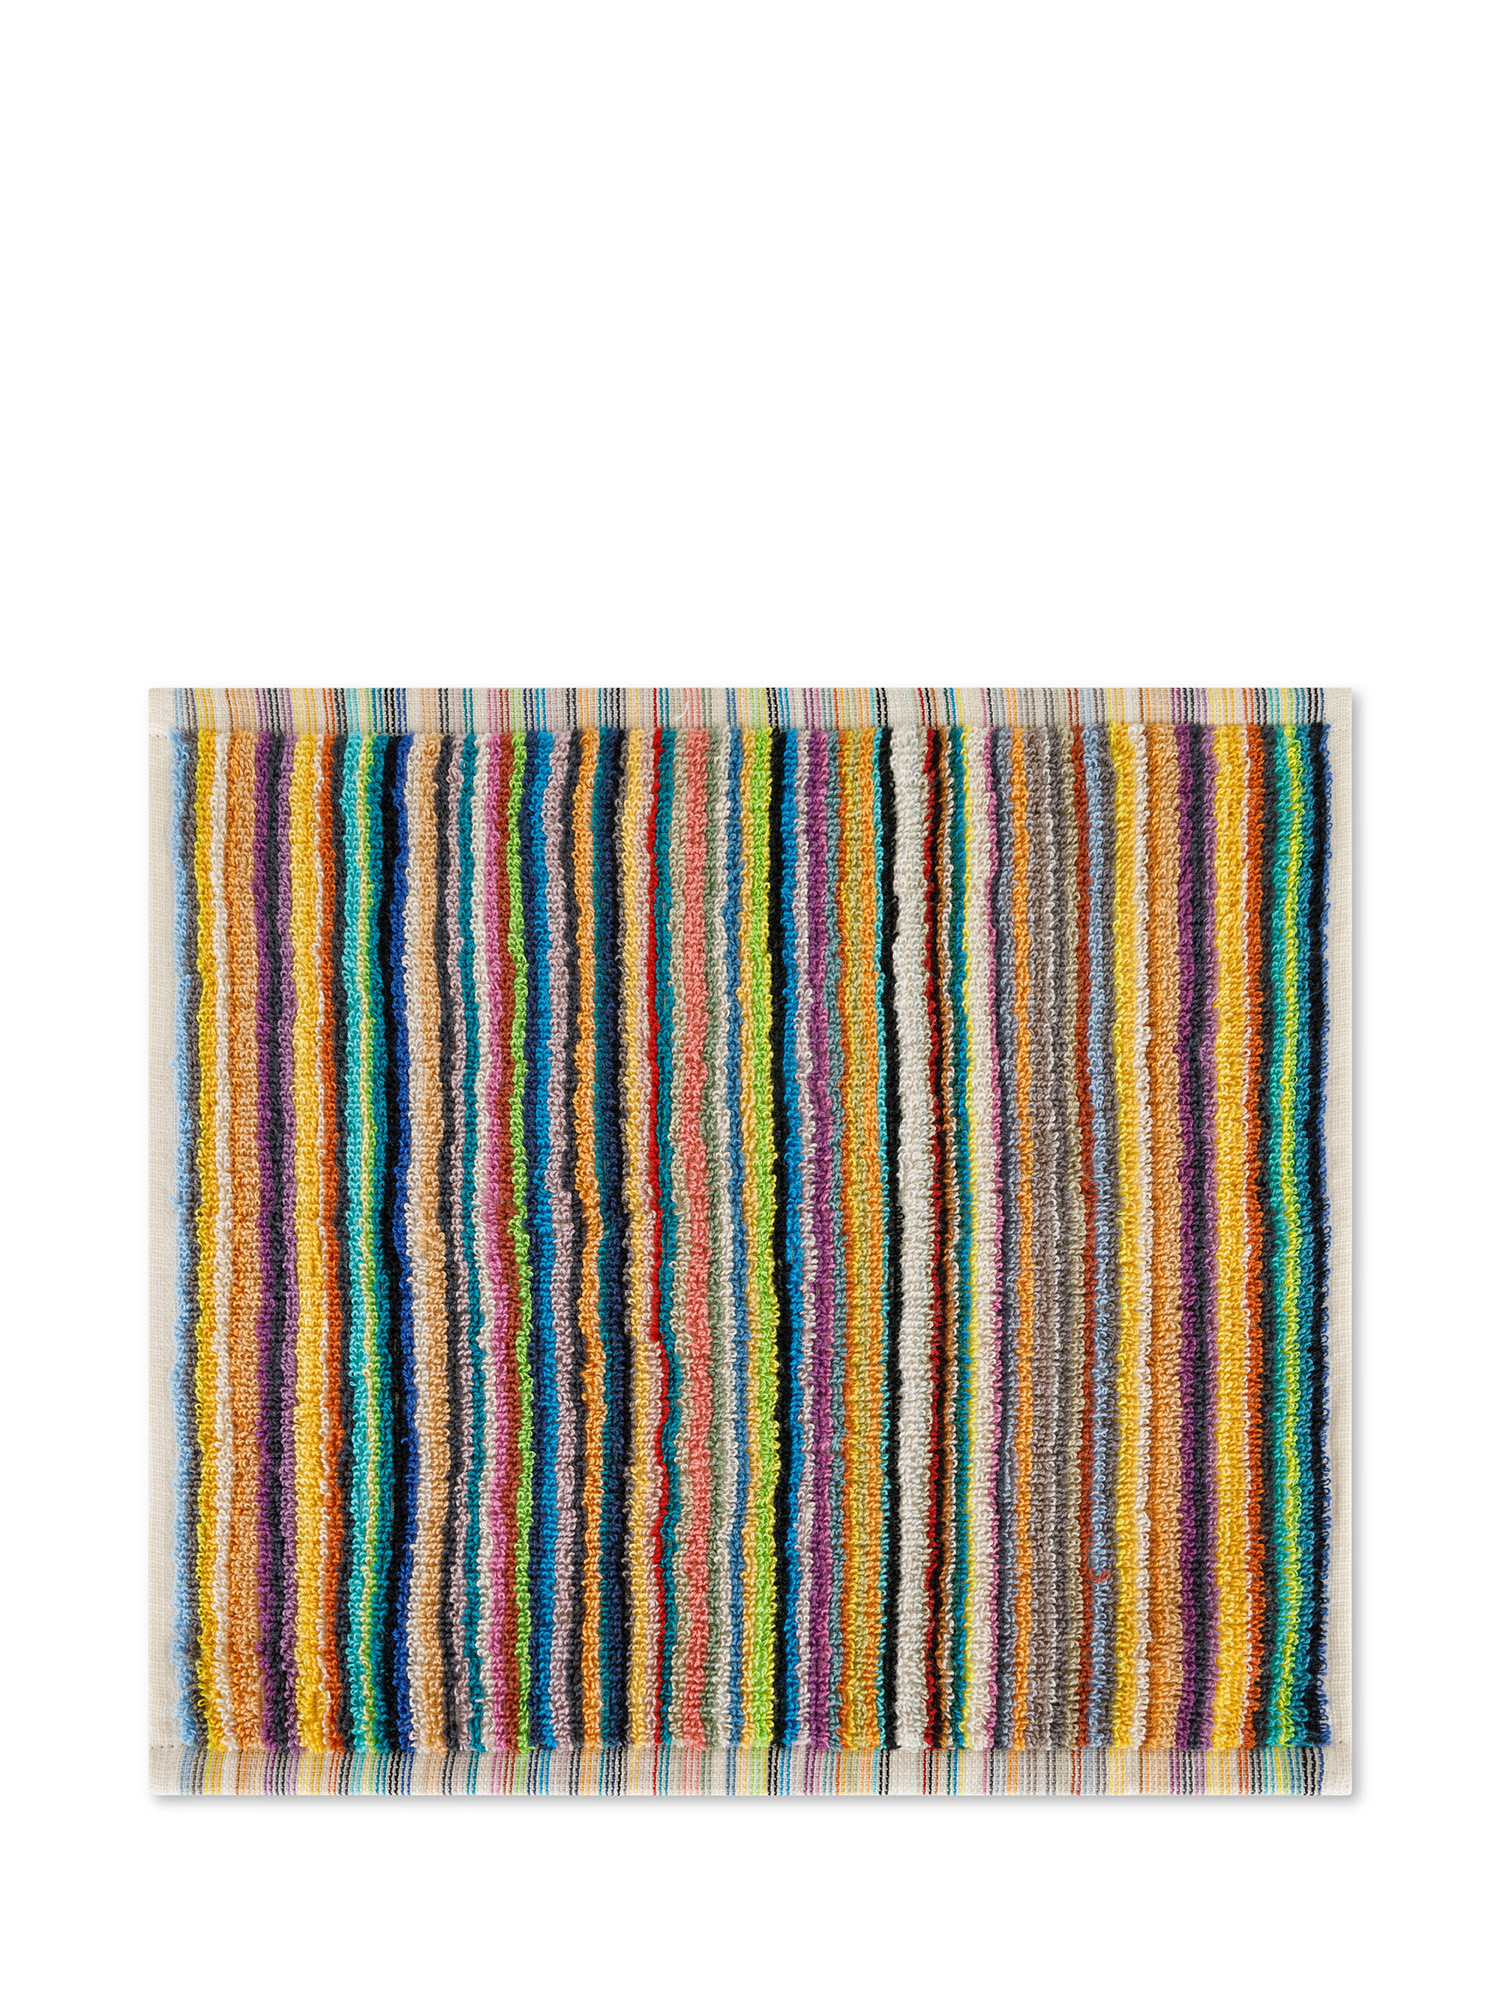 Set of 2 striped jacquard cotton terry cloths, Multicolor, large image number 1